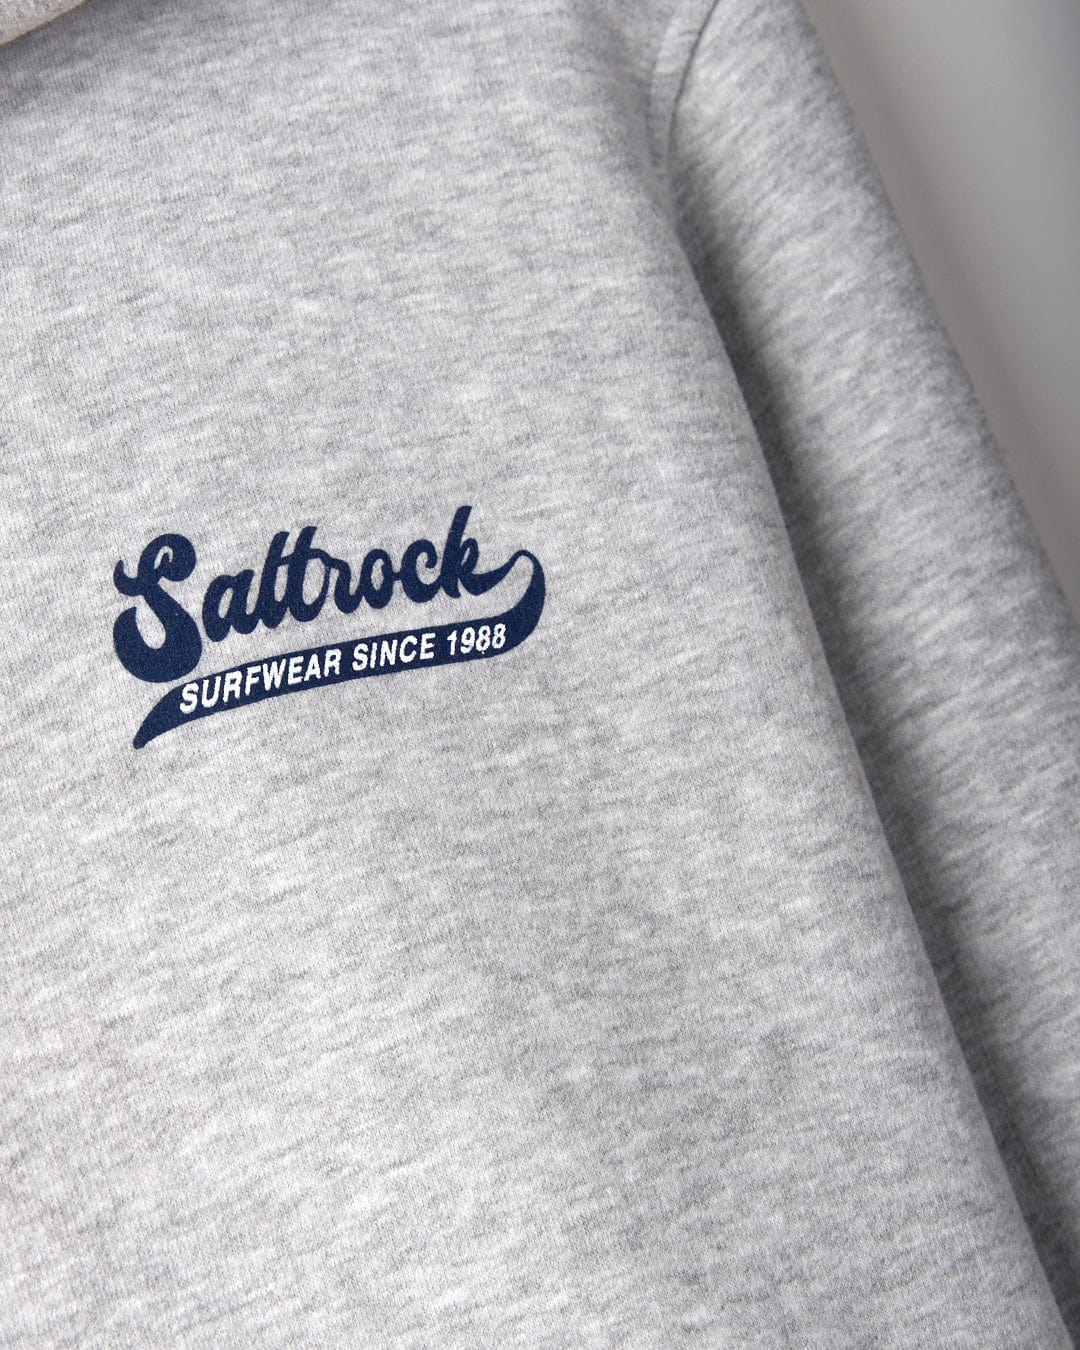 Home Run - Mens Zip Hoodie - Grey featuring the "Saltrock Surfwear Since 1988" logo in blue on the left chest area, complete with a hood with drawstrings. This stylish piece also boasts classic Saltrock branding and is conveniently machine washable for easy care.